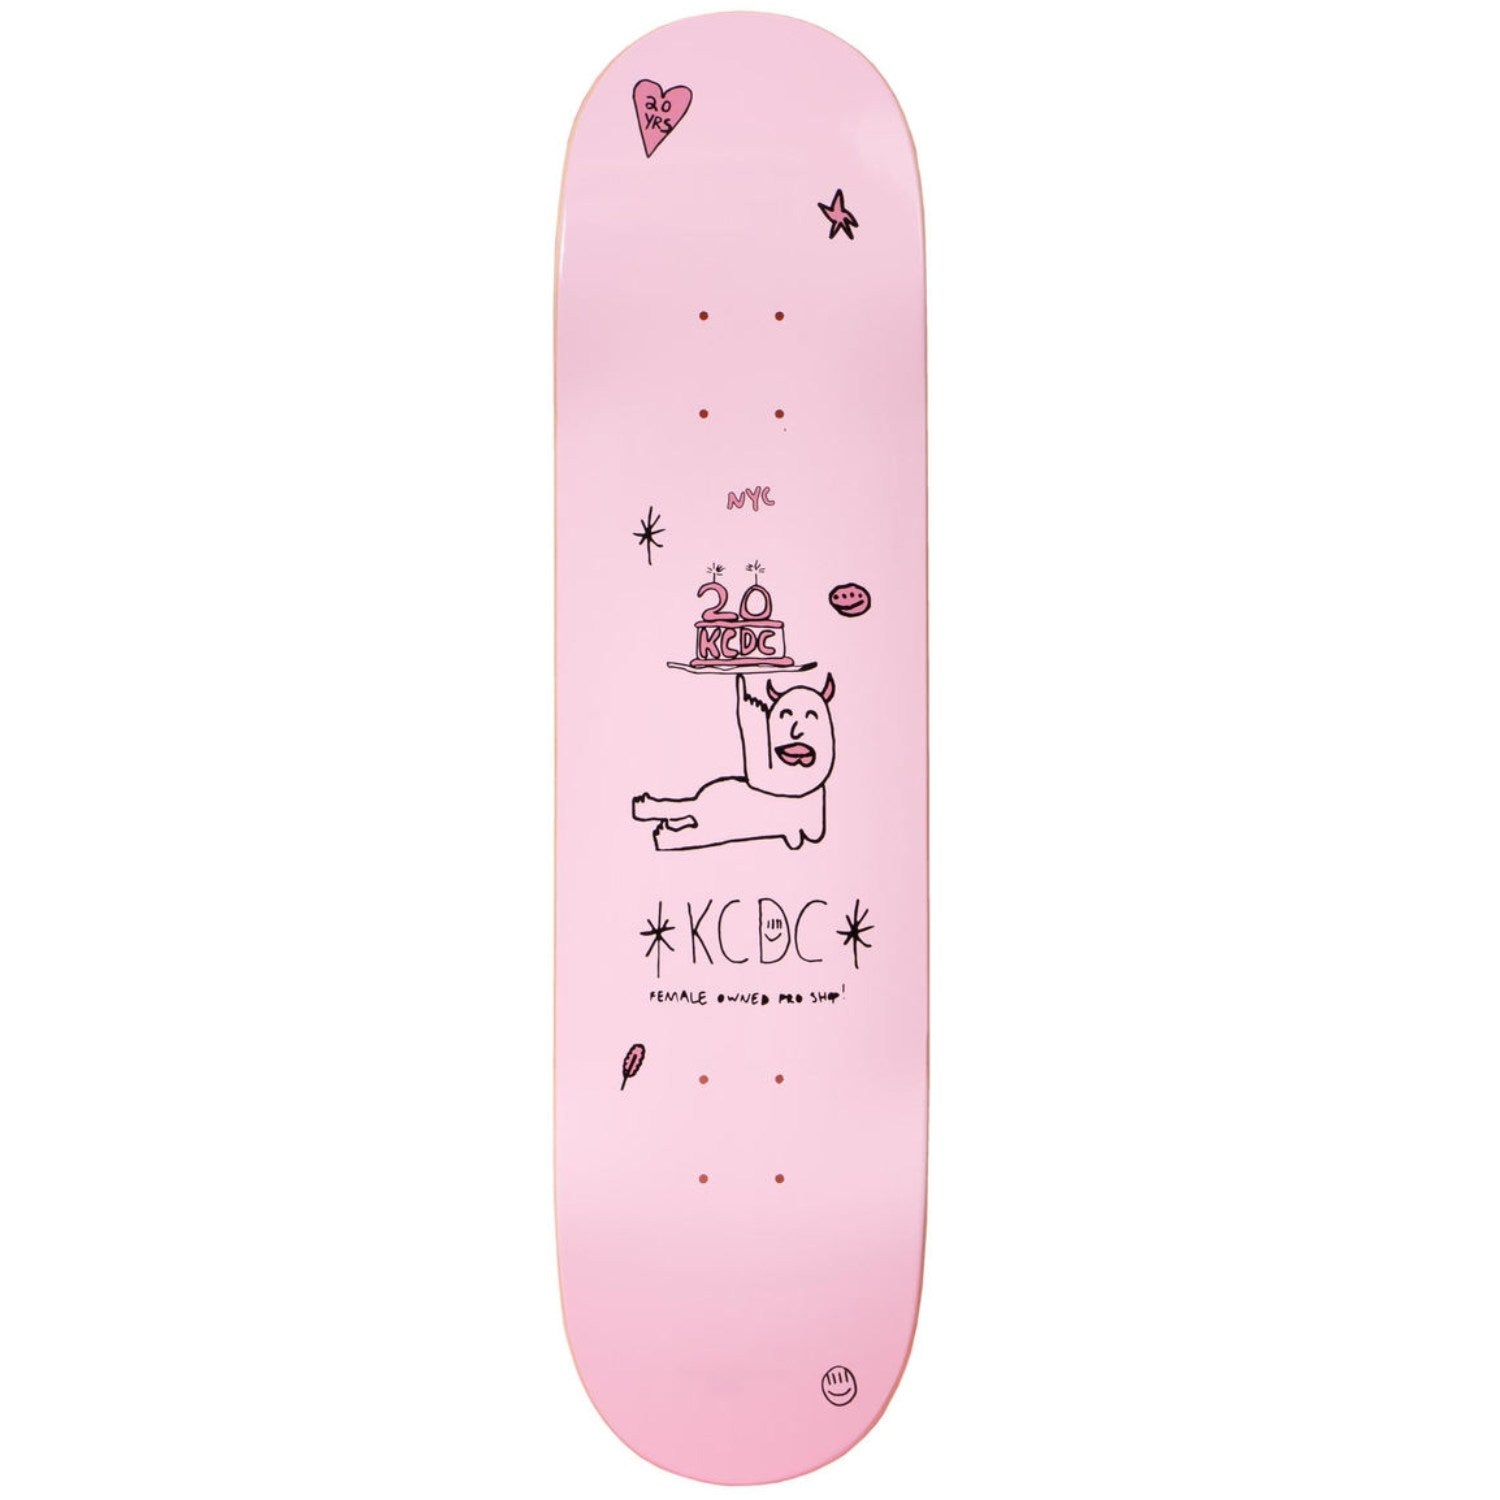 KCDC Deck - 20th Anniversary - Pink